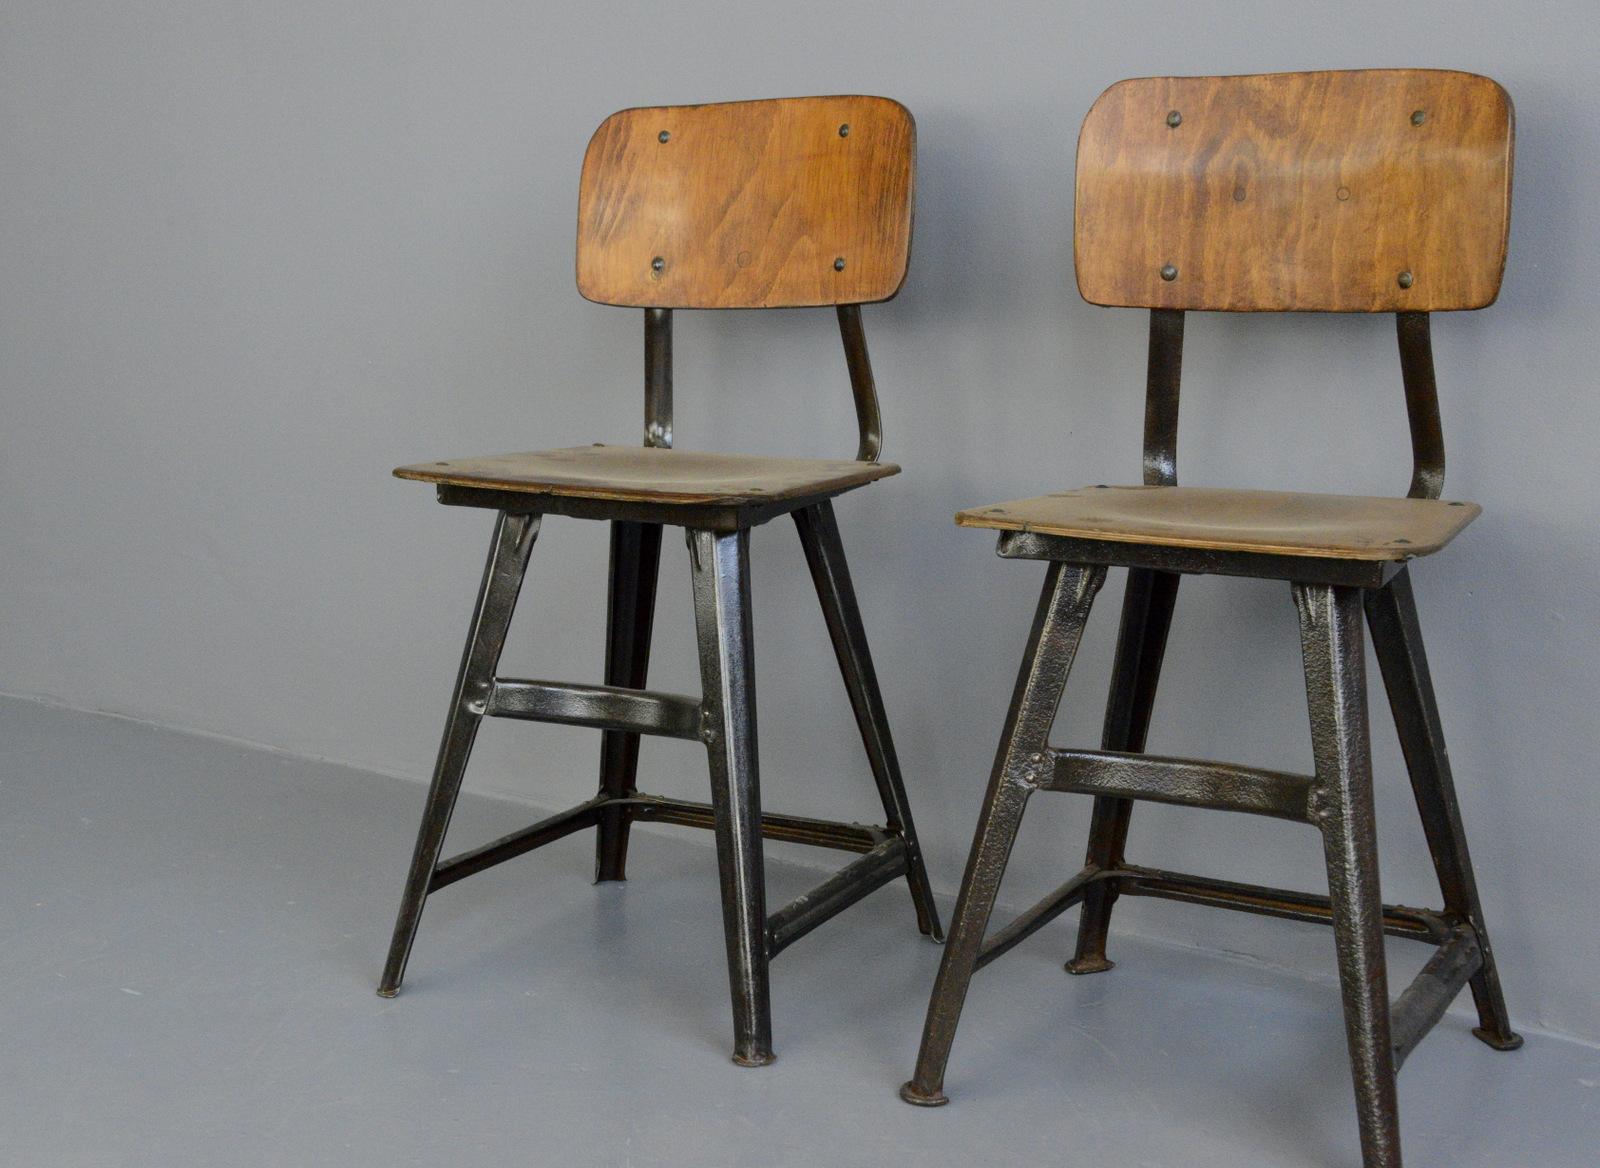 Industrial factory chairs by Rowac, circa 1920s

- Price is per chair (2 available)
- Steel frame
- Ply seat and back rest
- Relief 